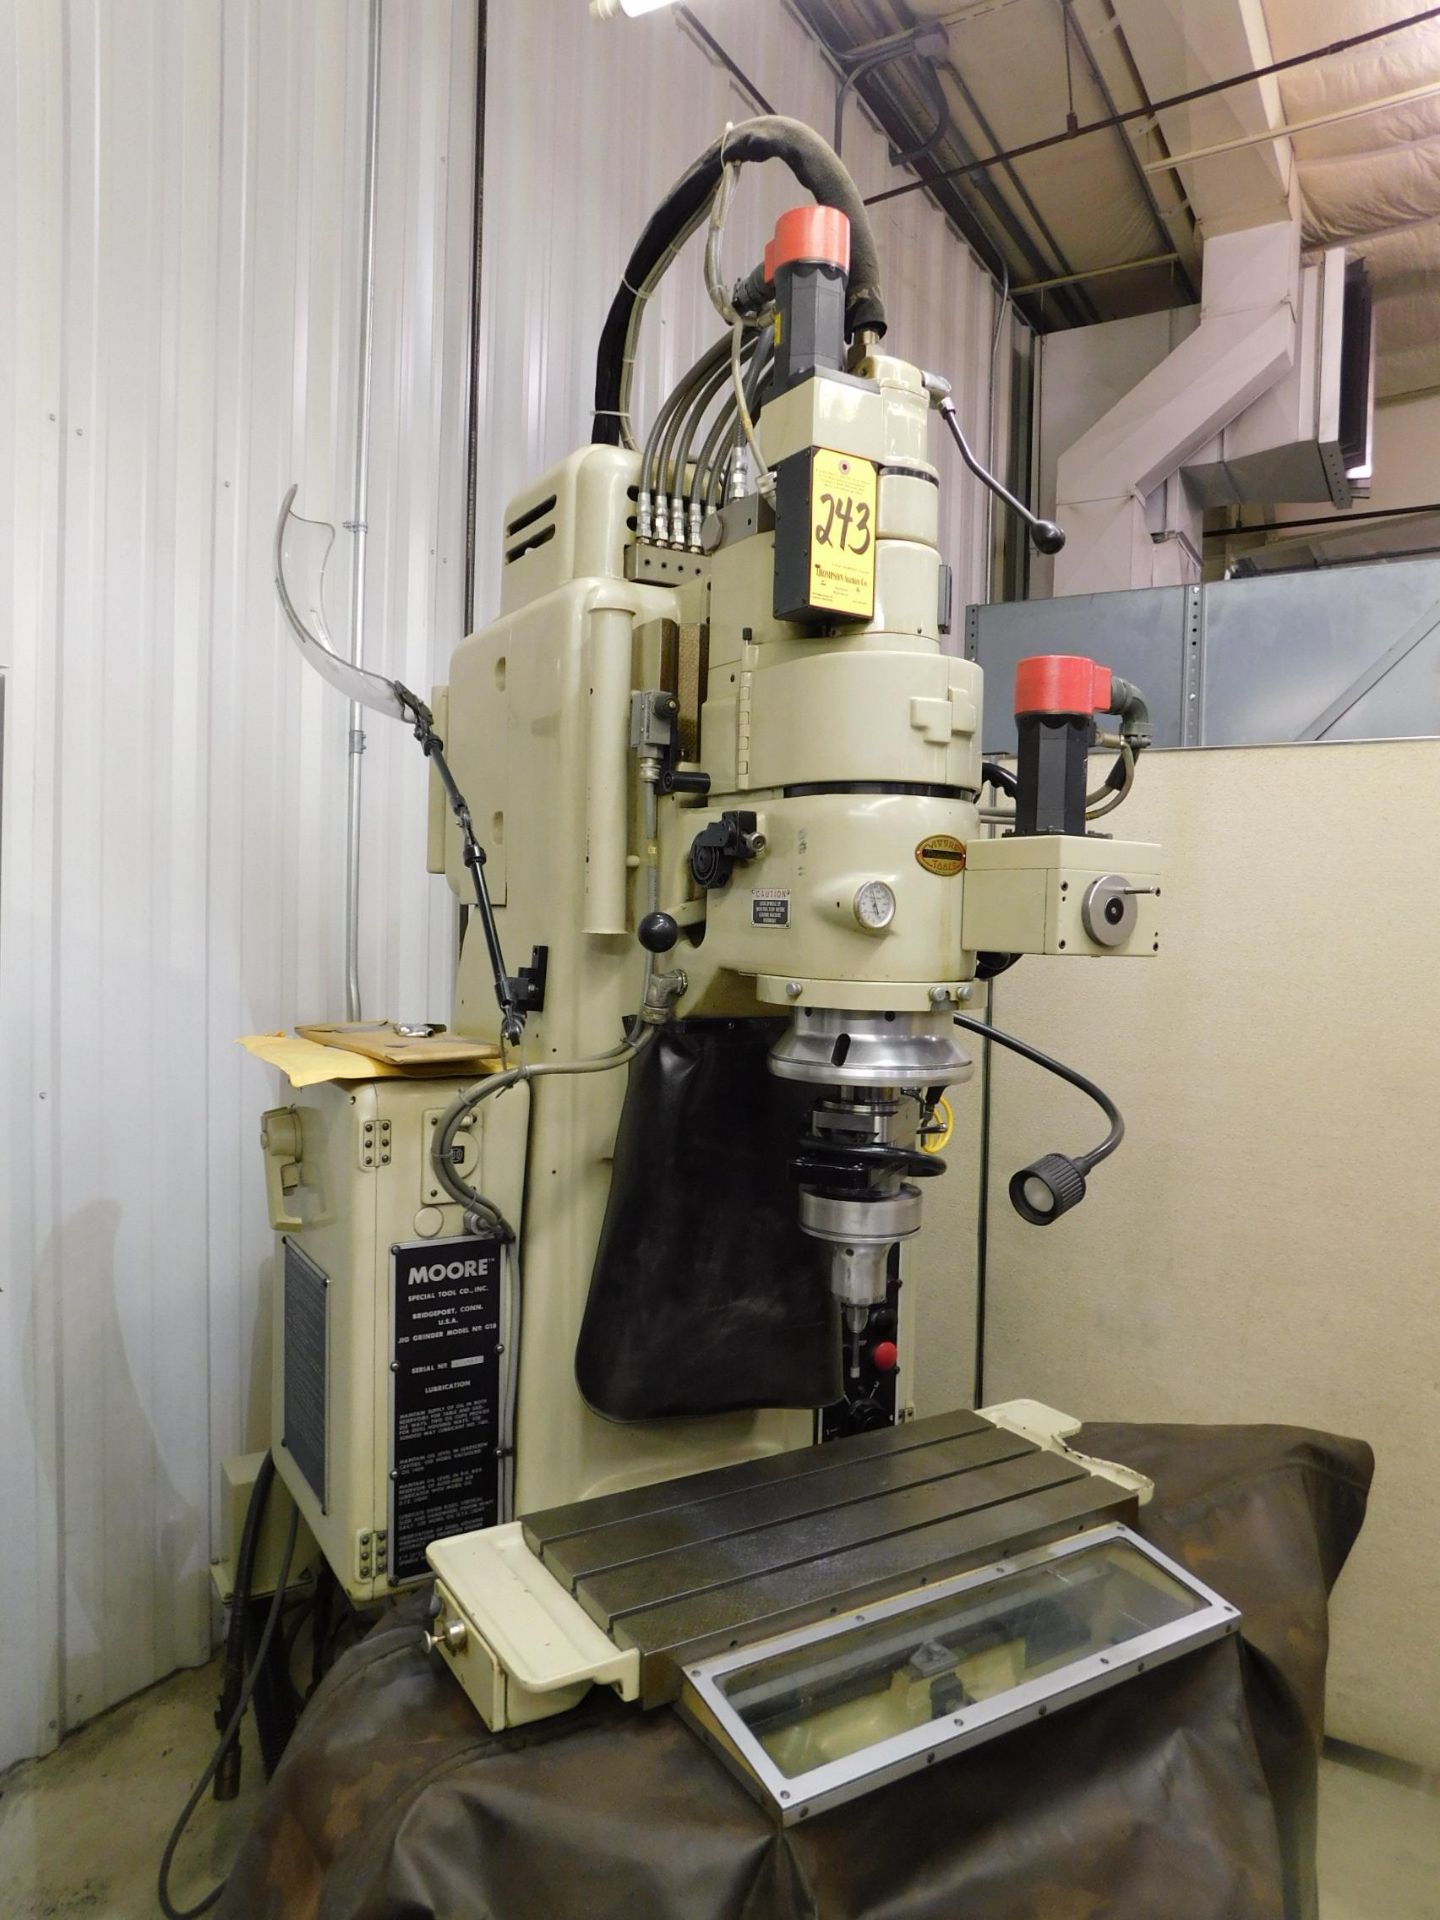 Moore Model G18 CNC Jig Grinder snG900, w/GE Fanuc Series 0-M Cnc Control - Image 2 of 10